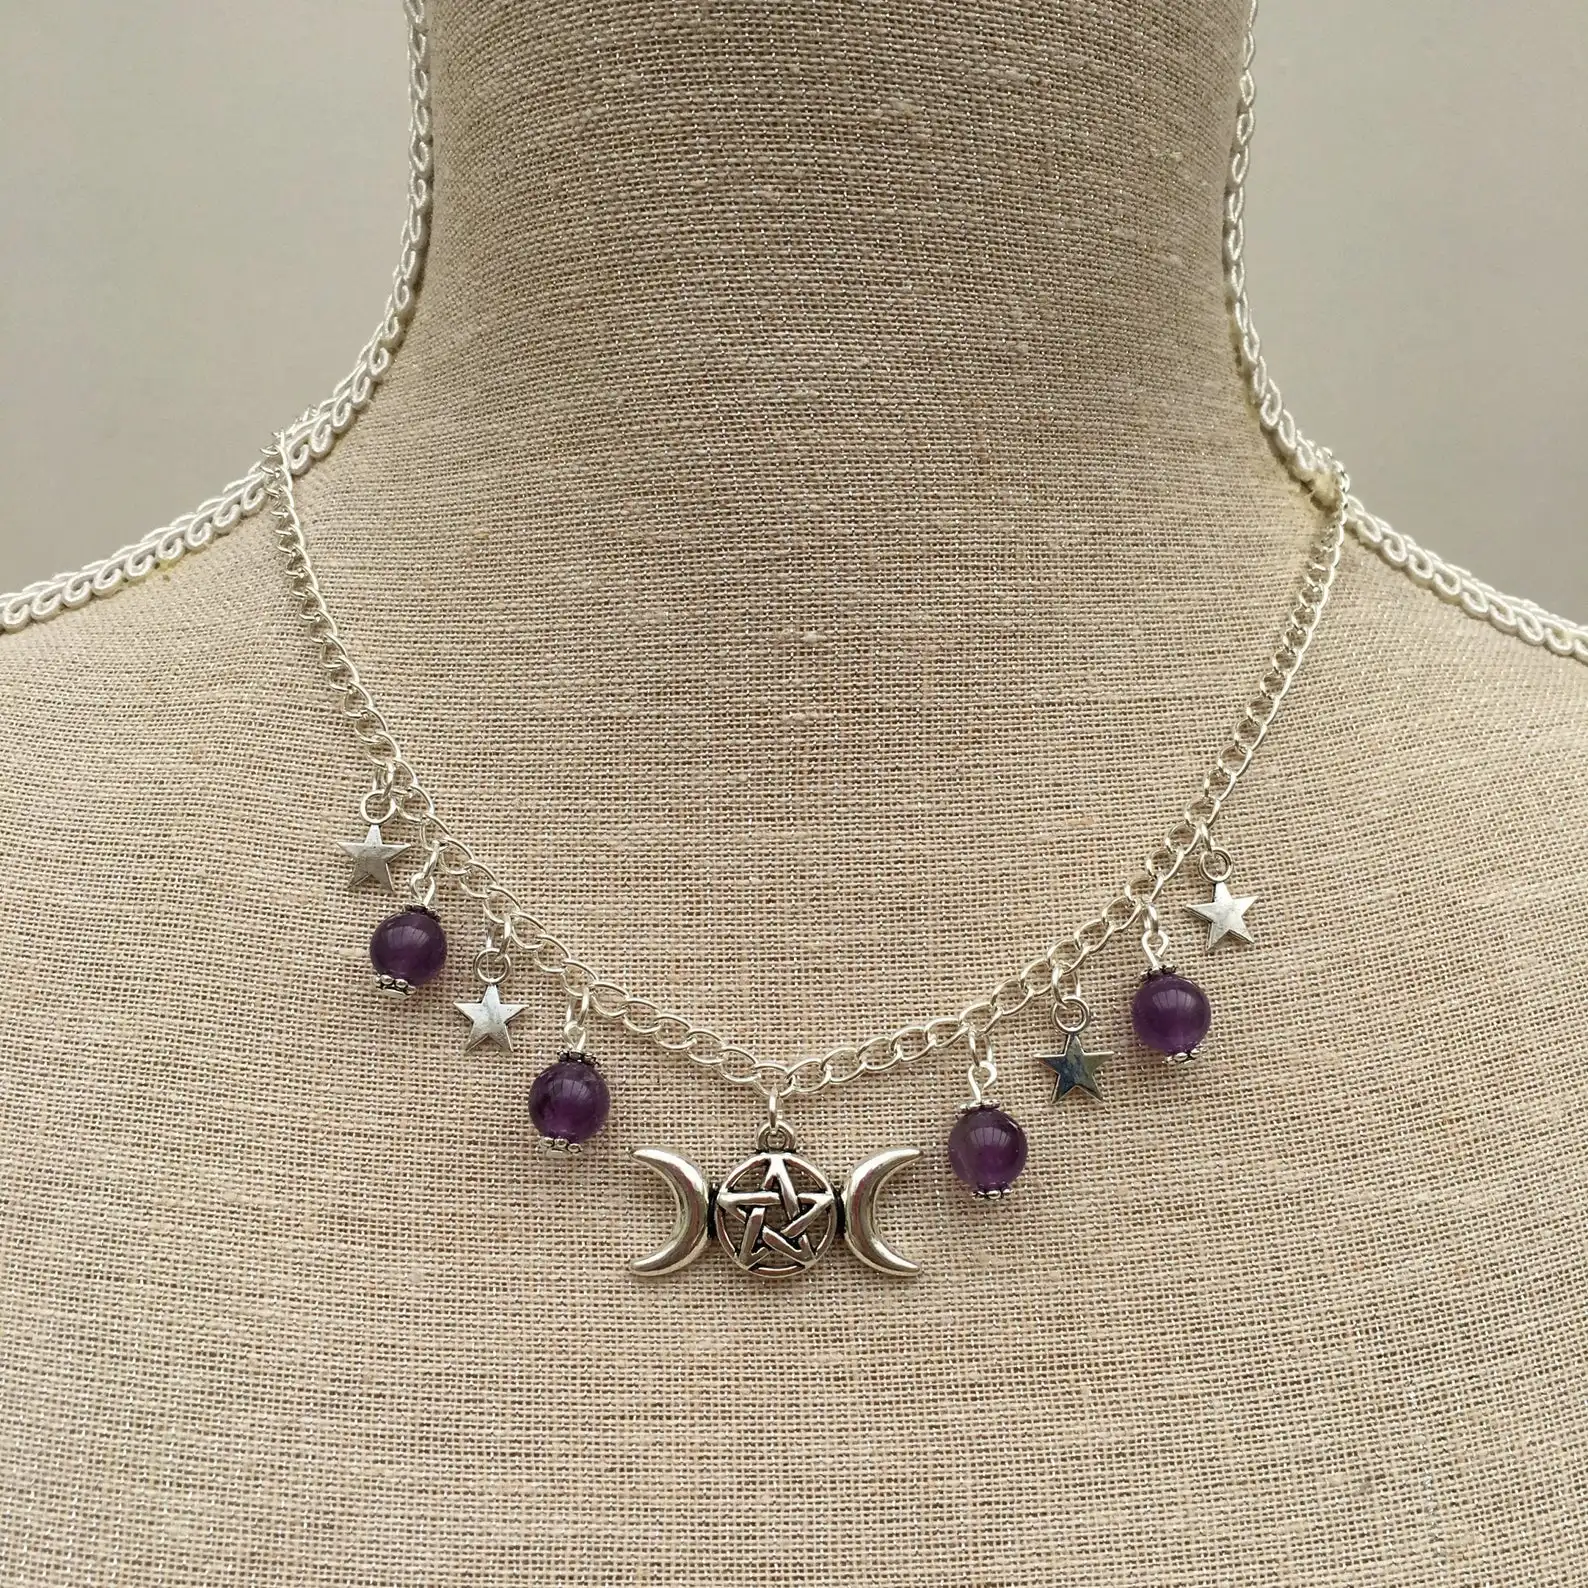 Crystal Ohm necklace Amethyst rosary necklace, Spiritual Buddhist Hindu Ohm Aum Om necklace images - 6